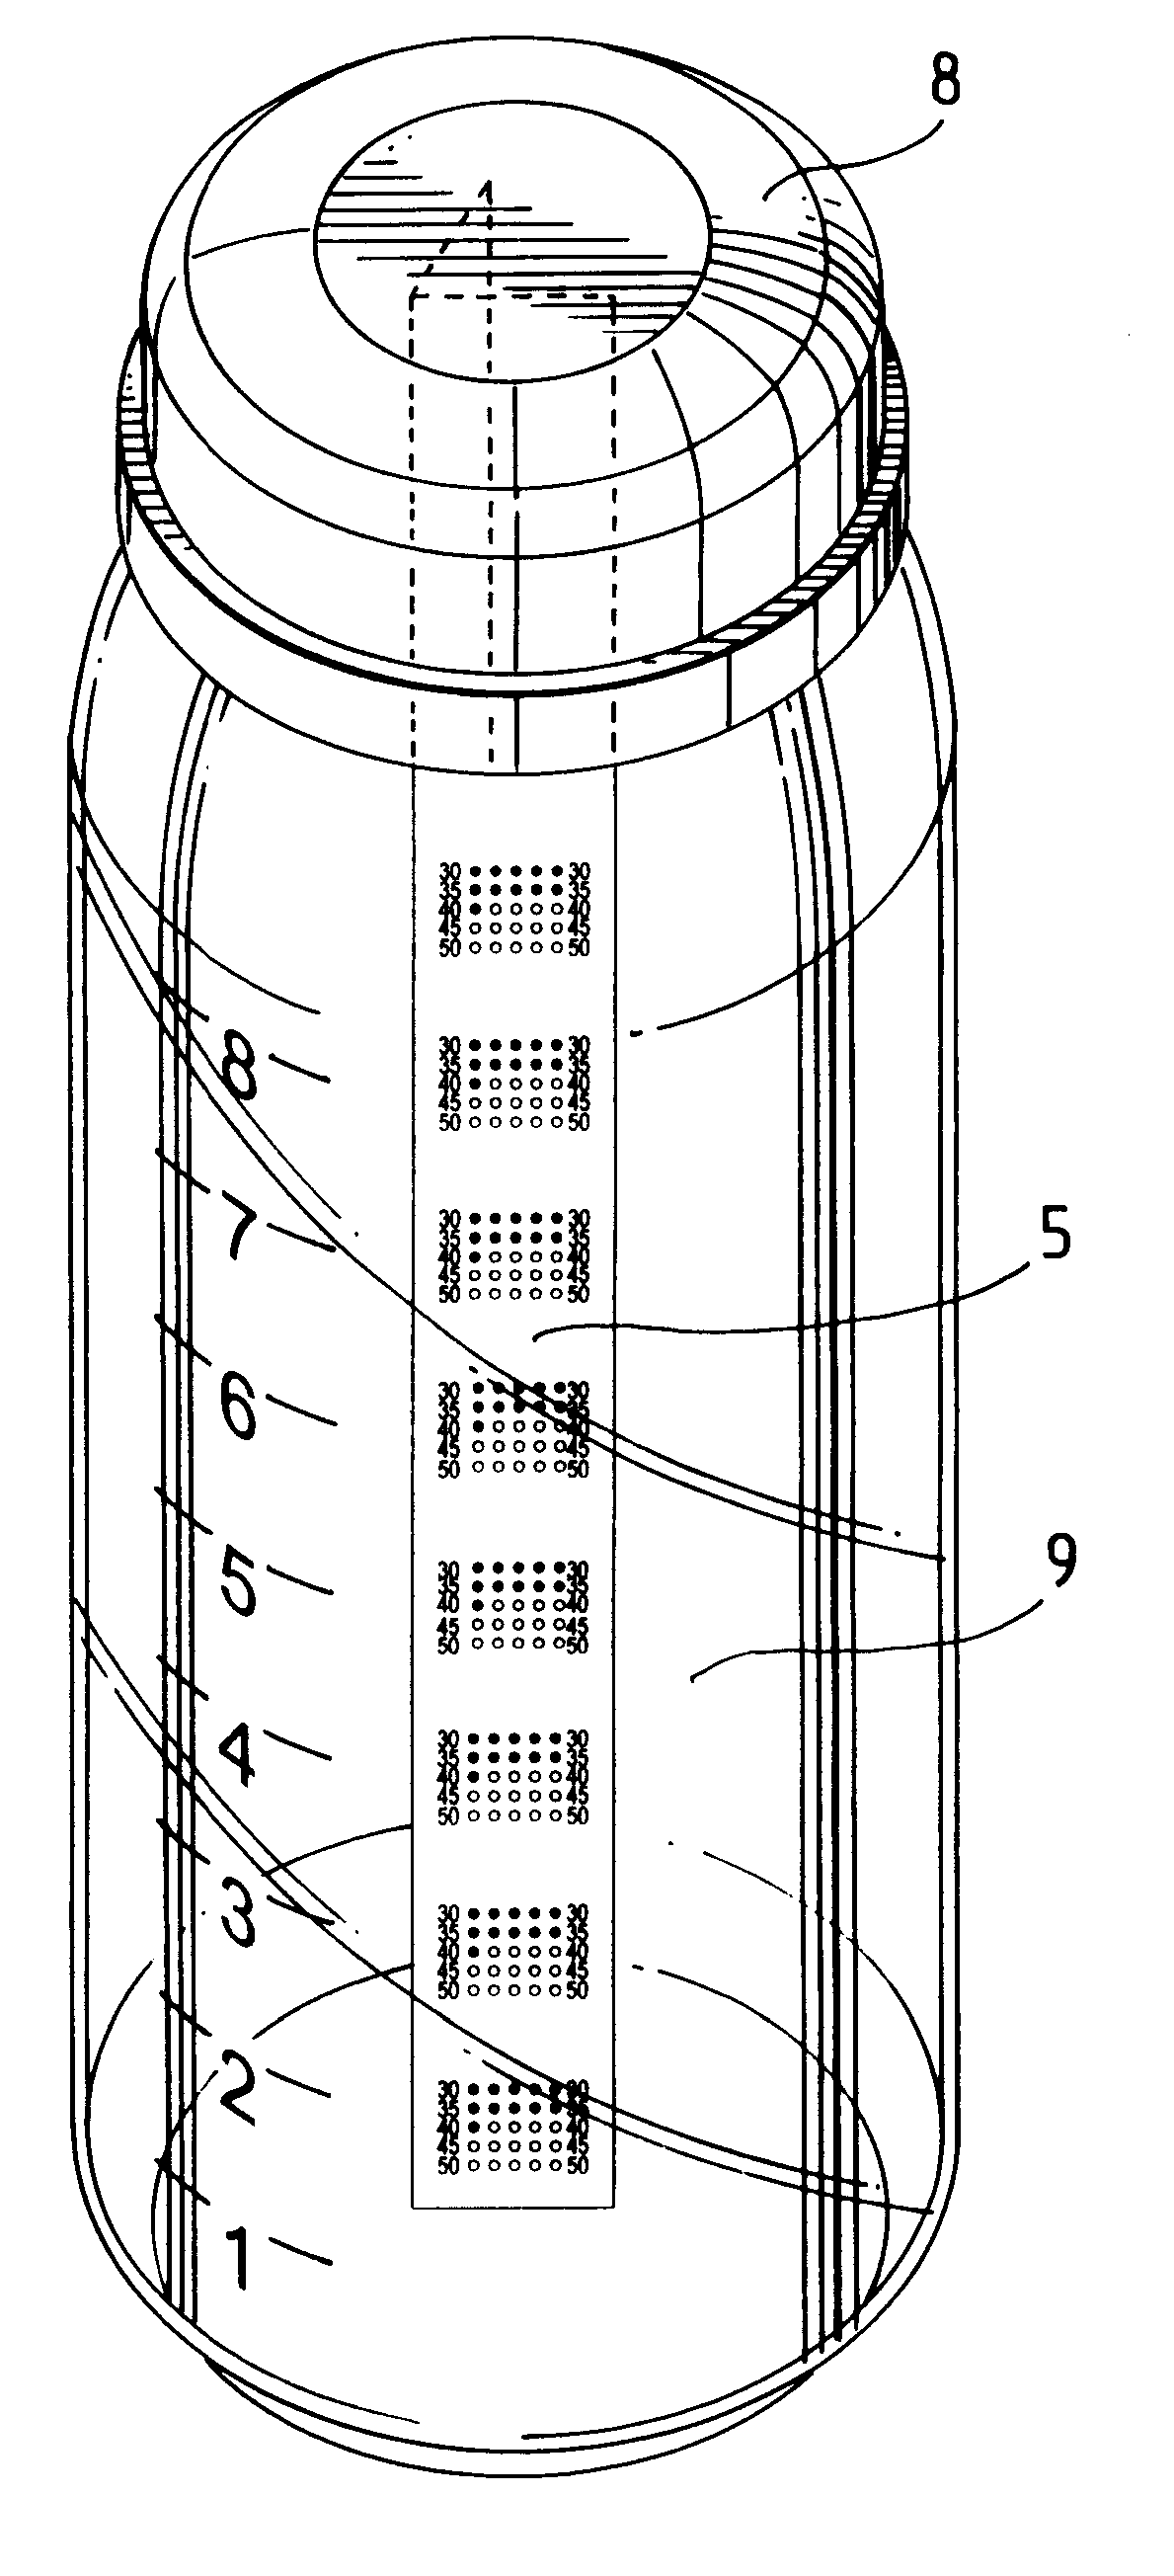 Shielding method for microwave heating of infant formulae to a safe and uniform temperature